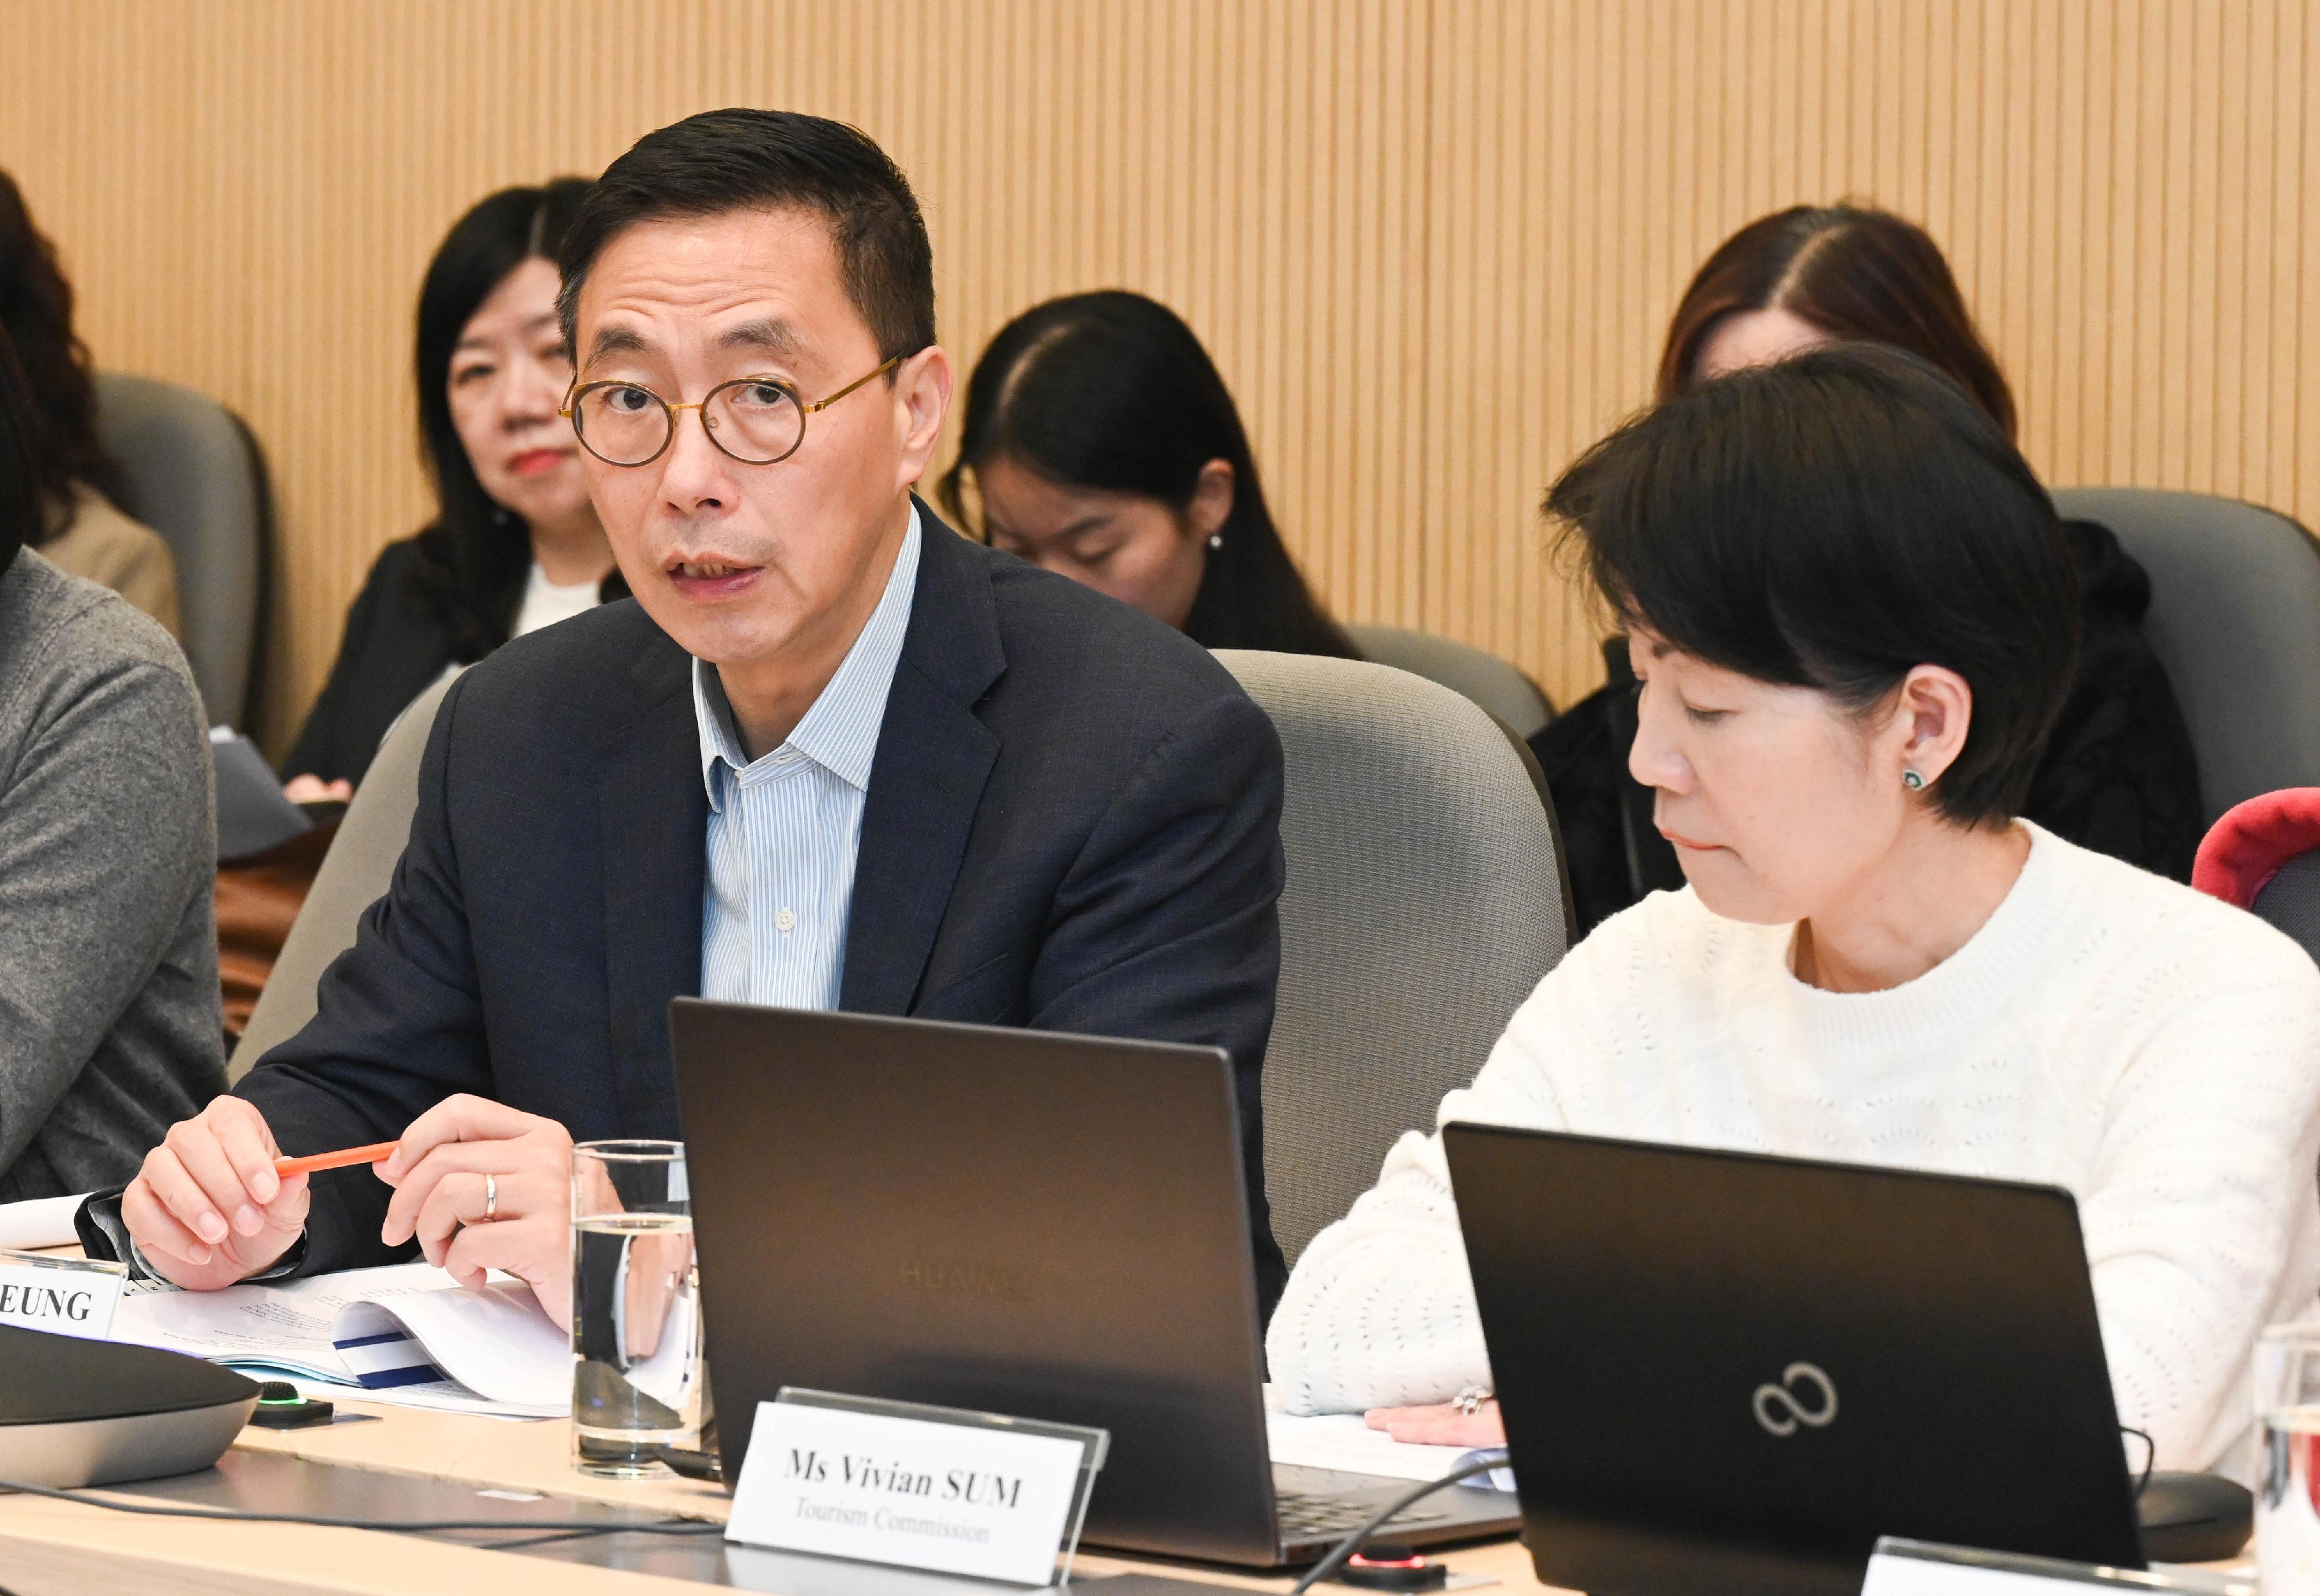 The Secretary for Culture, Sports and Tourism, Mr Kevin Yeung (left), chaired a meeting today (January 15) to co-ordinate preparations for visitor arrivals to Hong Kong during the Chinese New Year Golden Week. Mr Yeung was briefed by representatives of various participating units on their relevant preparation work.